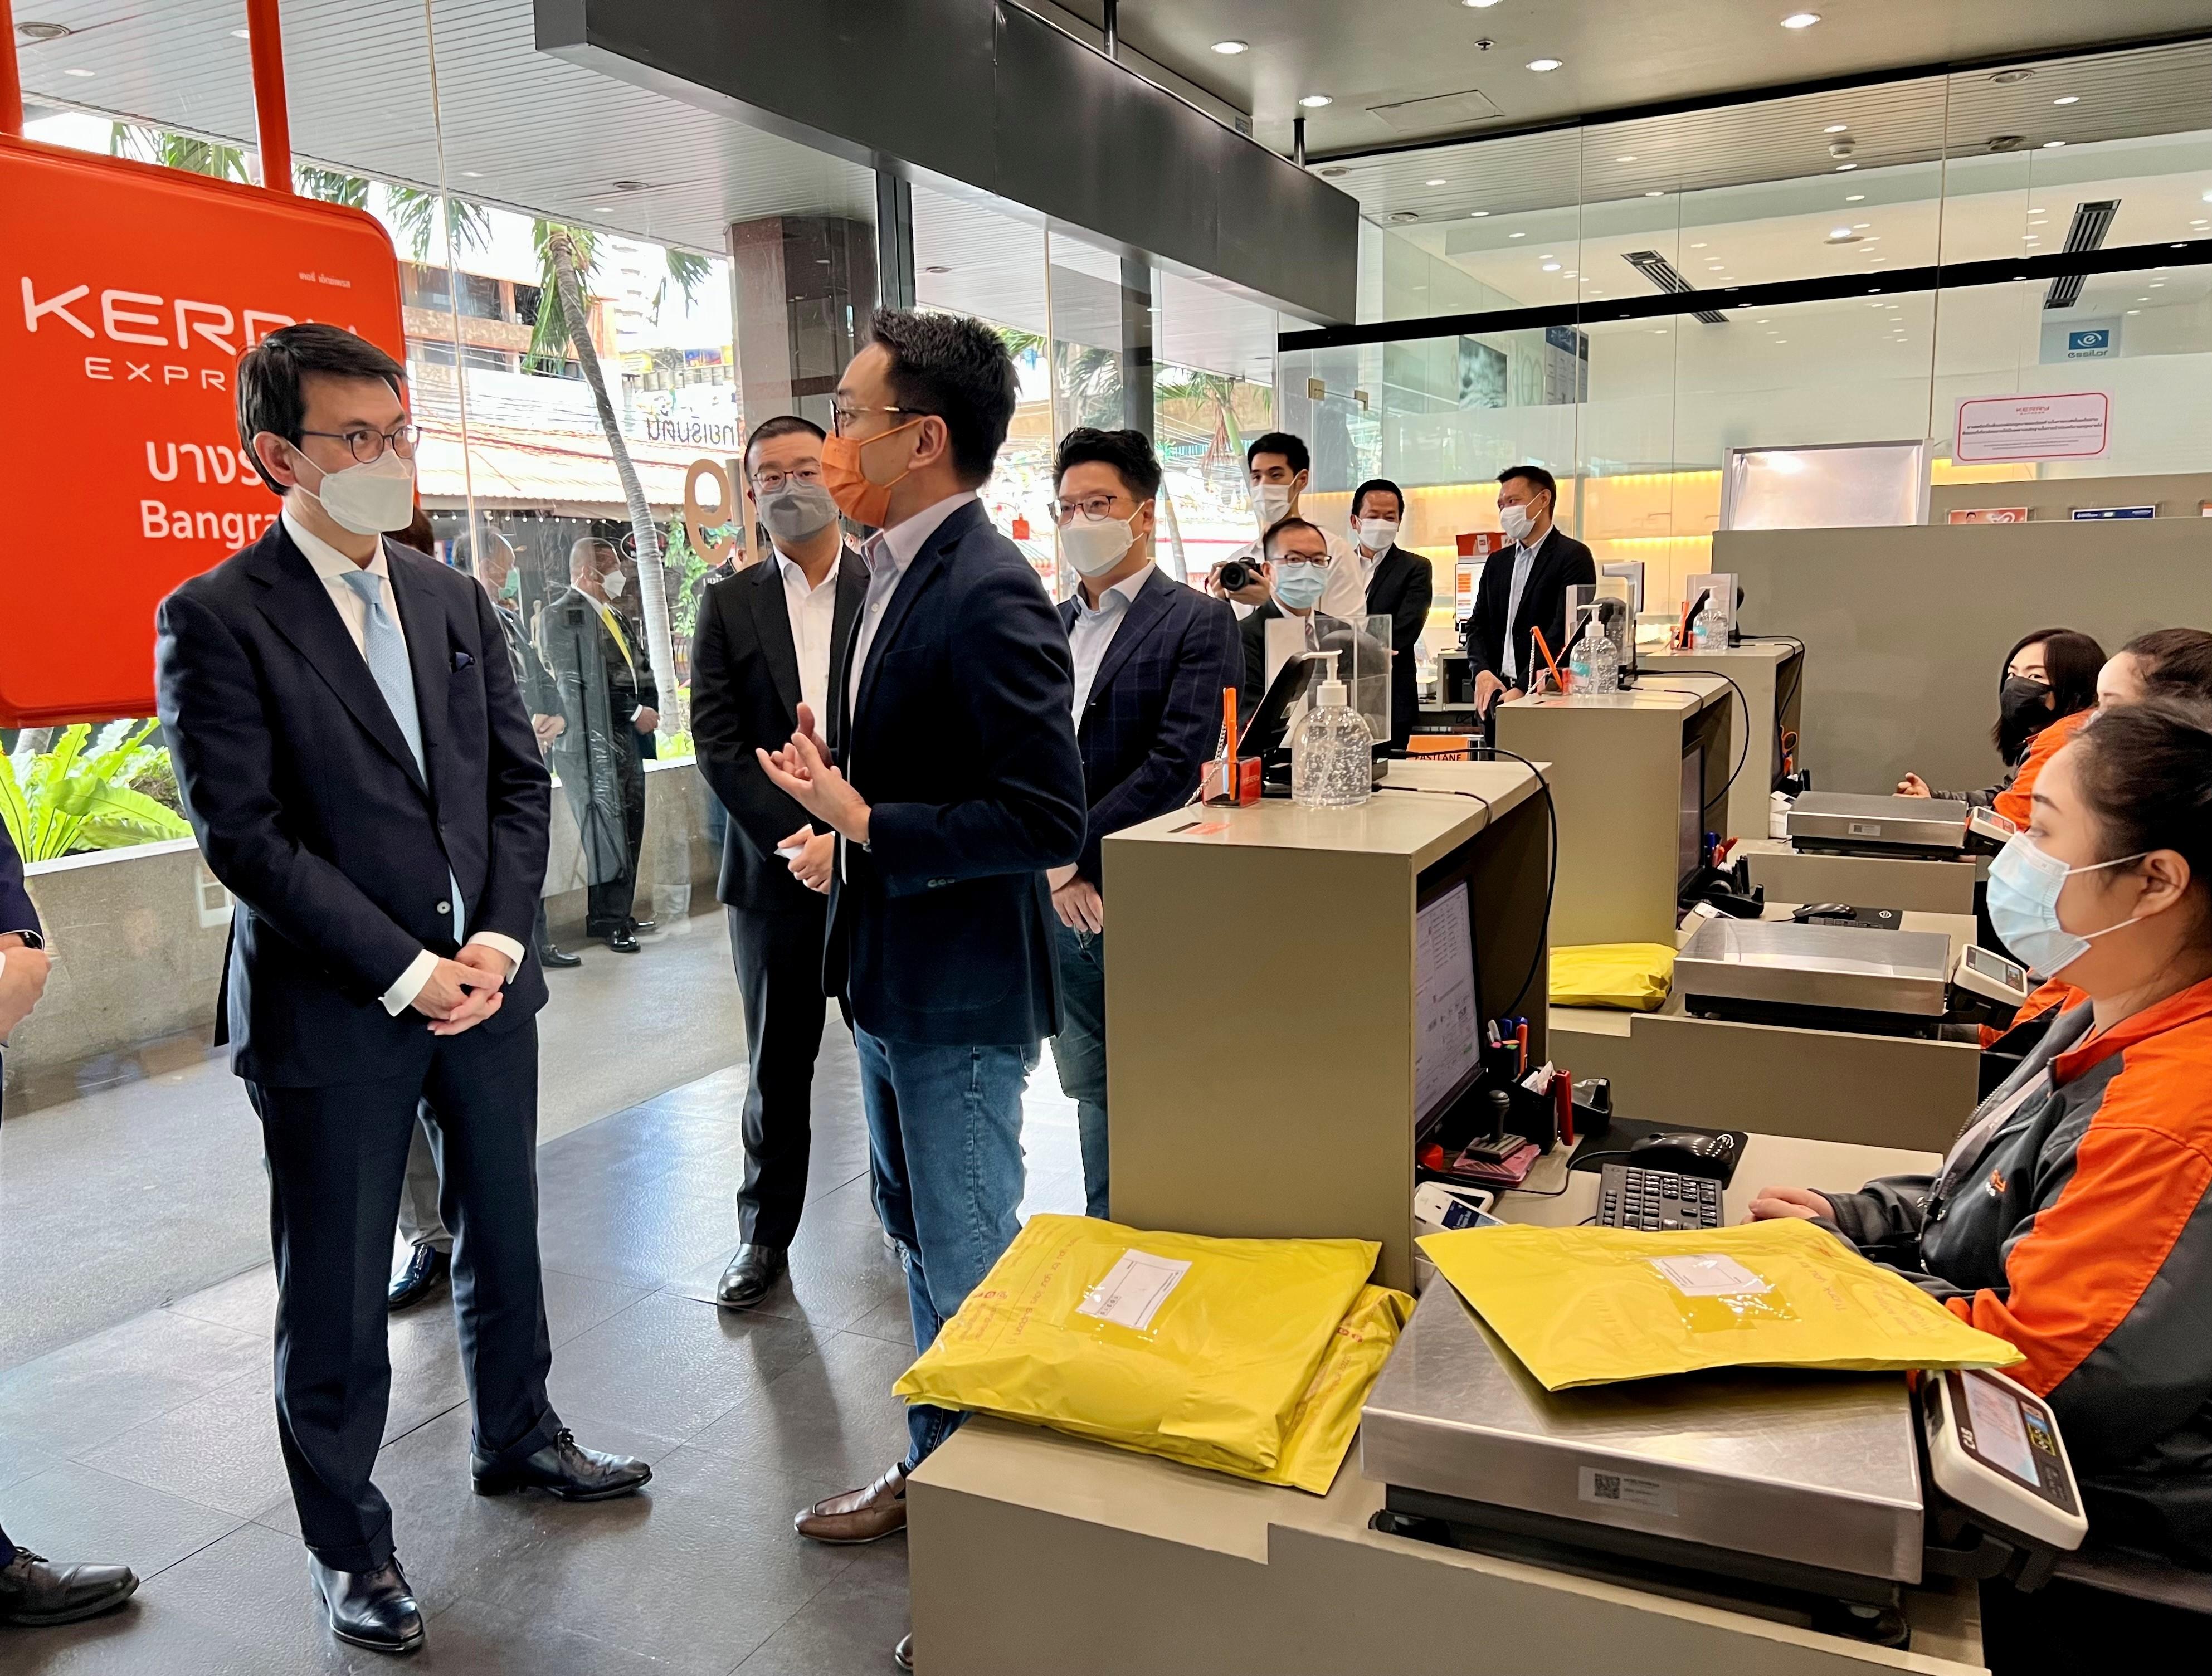 The Secretary for Commerce and Economic Development, Mr Edward Yau, met with the Thai business sector in Bangkok, Thailand, today (May 19). He also visited a Hong Kong-founded logistics company to learn about the development of local enterprises. Photo shows Mr Yau (left) being briefed by a representative of the logistics company.